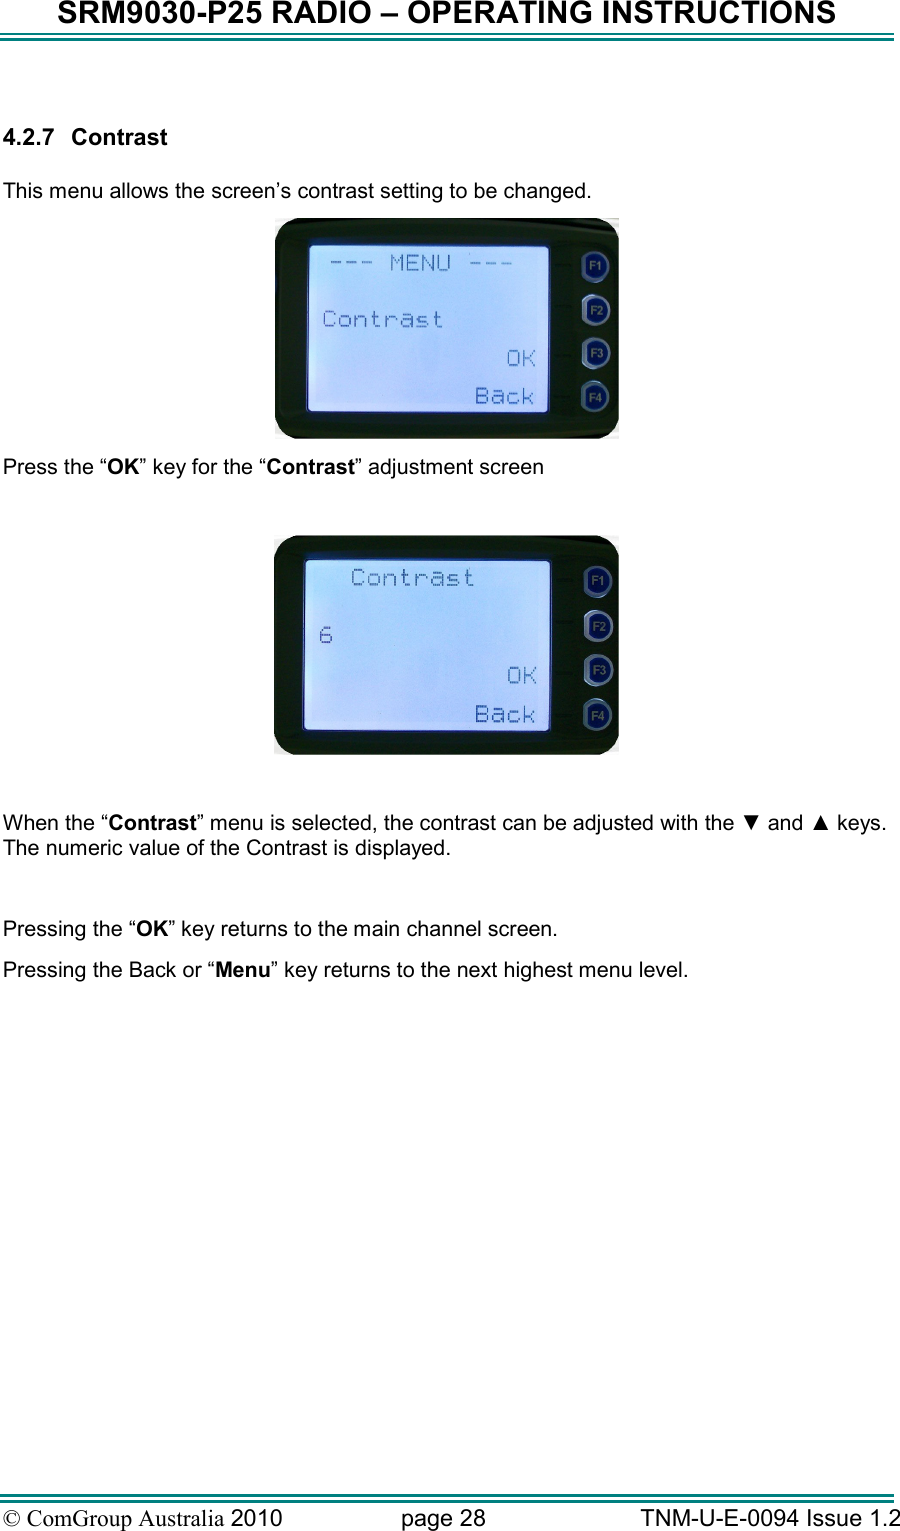 SRM9030-P25 RADIO – OPERATING INSTRUCTIONS © ComGroup Australia 2010  page 28   TNM-U-E-0094 Issue 1.2  4.2.7  Contrast  This menu allows the screen’s contrast setting to be changed.  Press the “OK” key for the “Contrast” adjustment screen    When the “Contrast” menu is selected, the contrast can be adjusted with the ▼ and ▲ keys.  The numeric value of the Contrast is displayed.   Pressing the “OK” key returns to the main channel screen.   Pressing the Back or “Menu” key returns to the next highest menu level. 